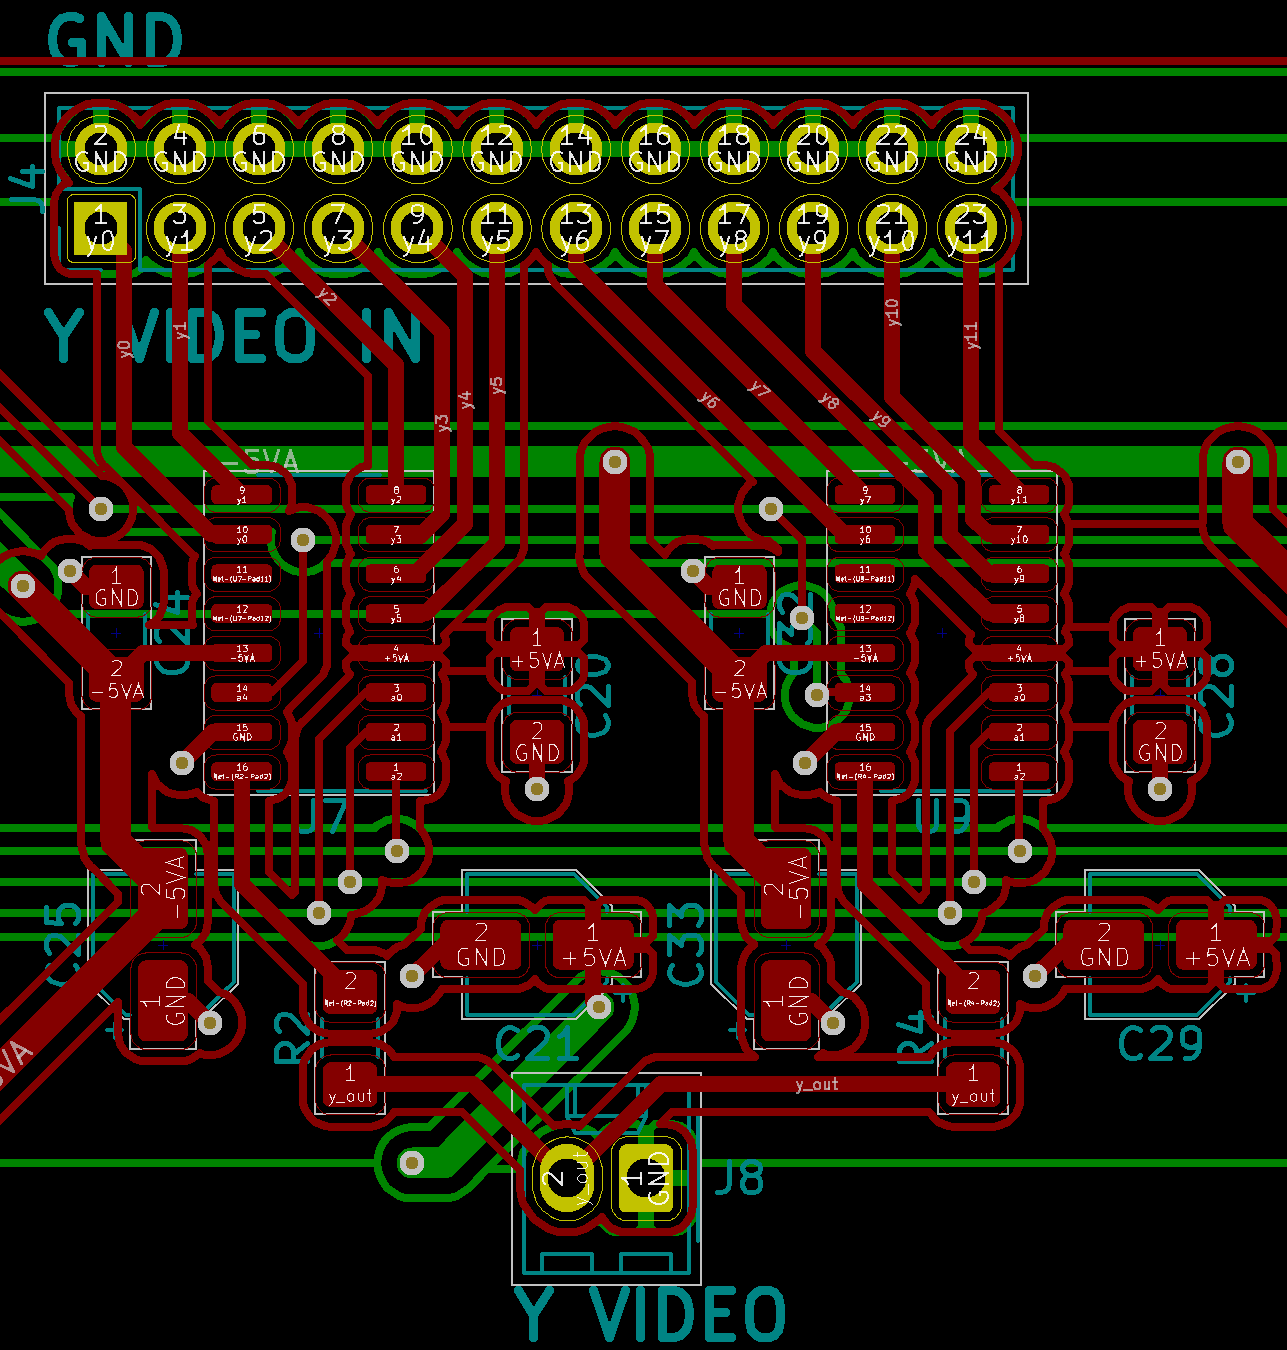 Closeup of video multiplexing area on PCB